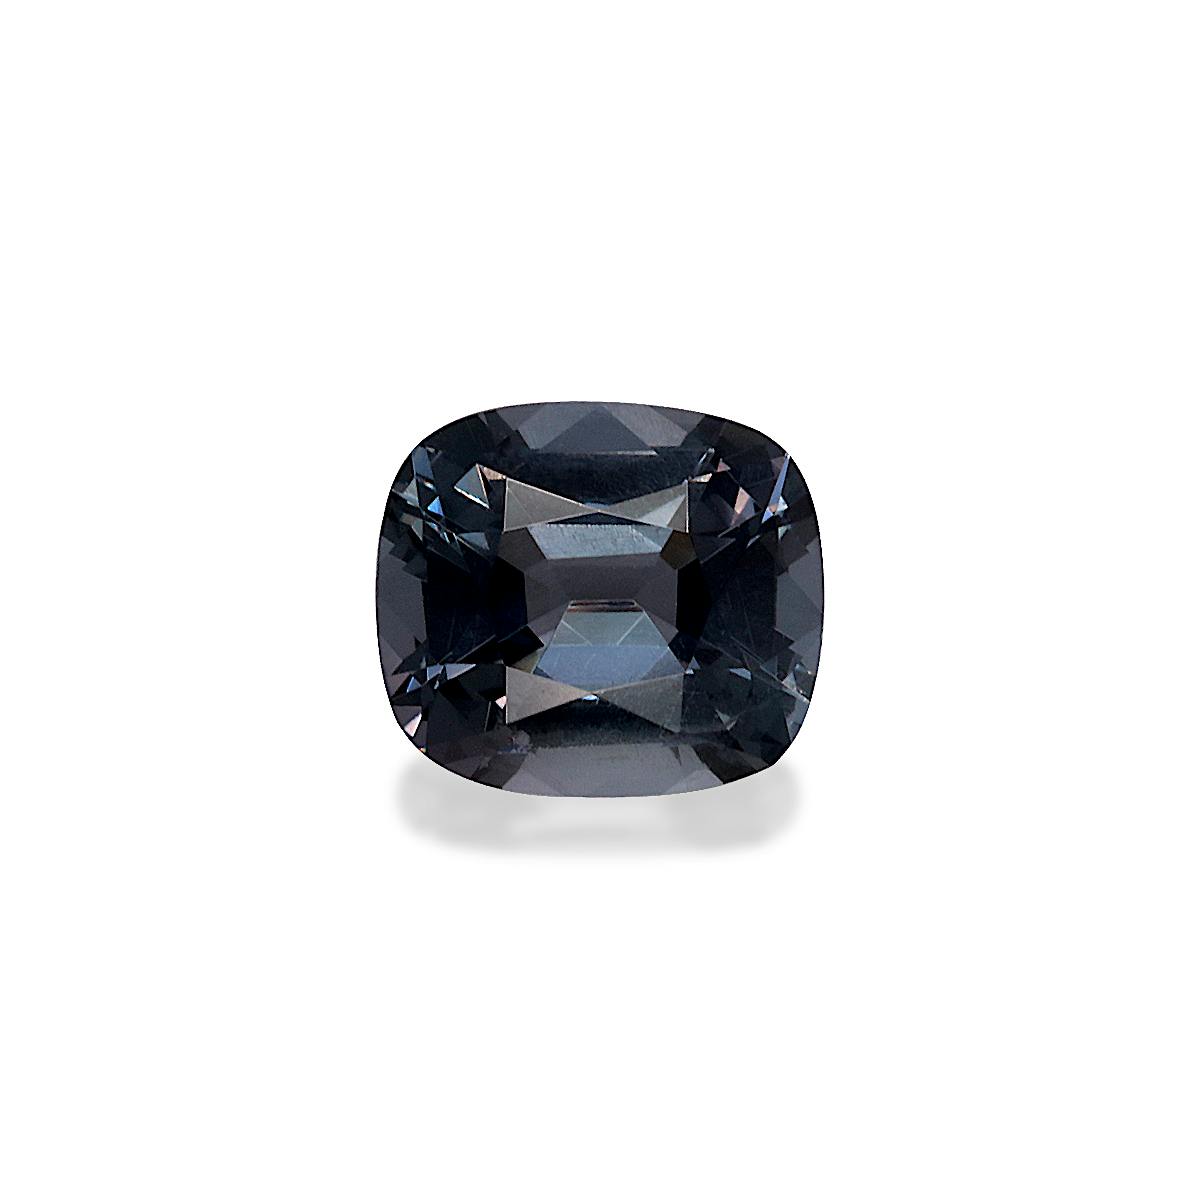 Grey Spinel 1.35ct - Main Image